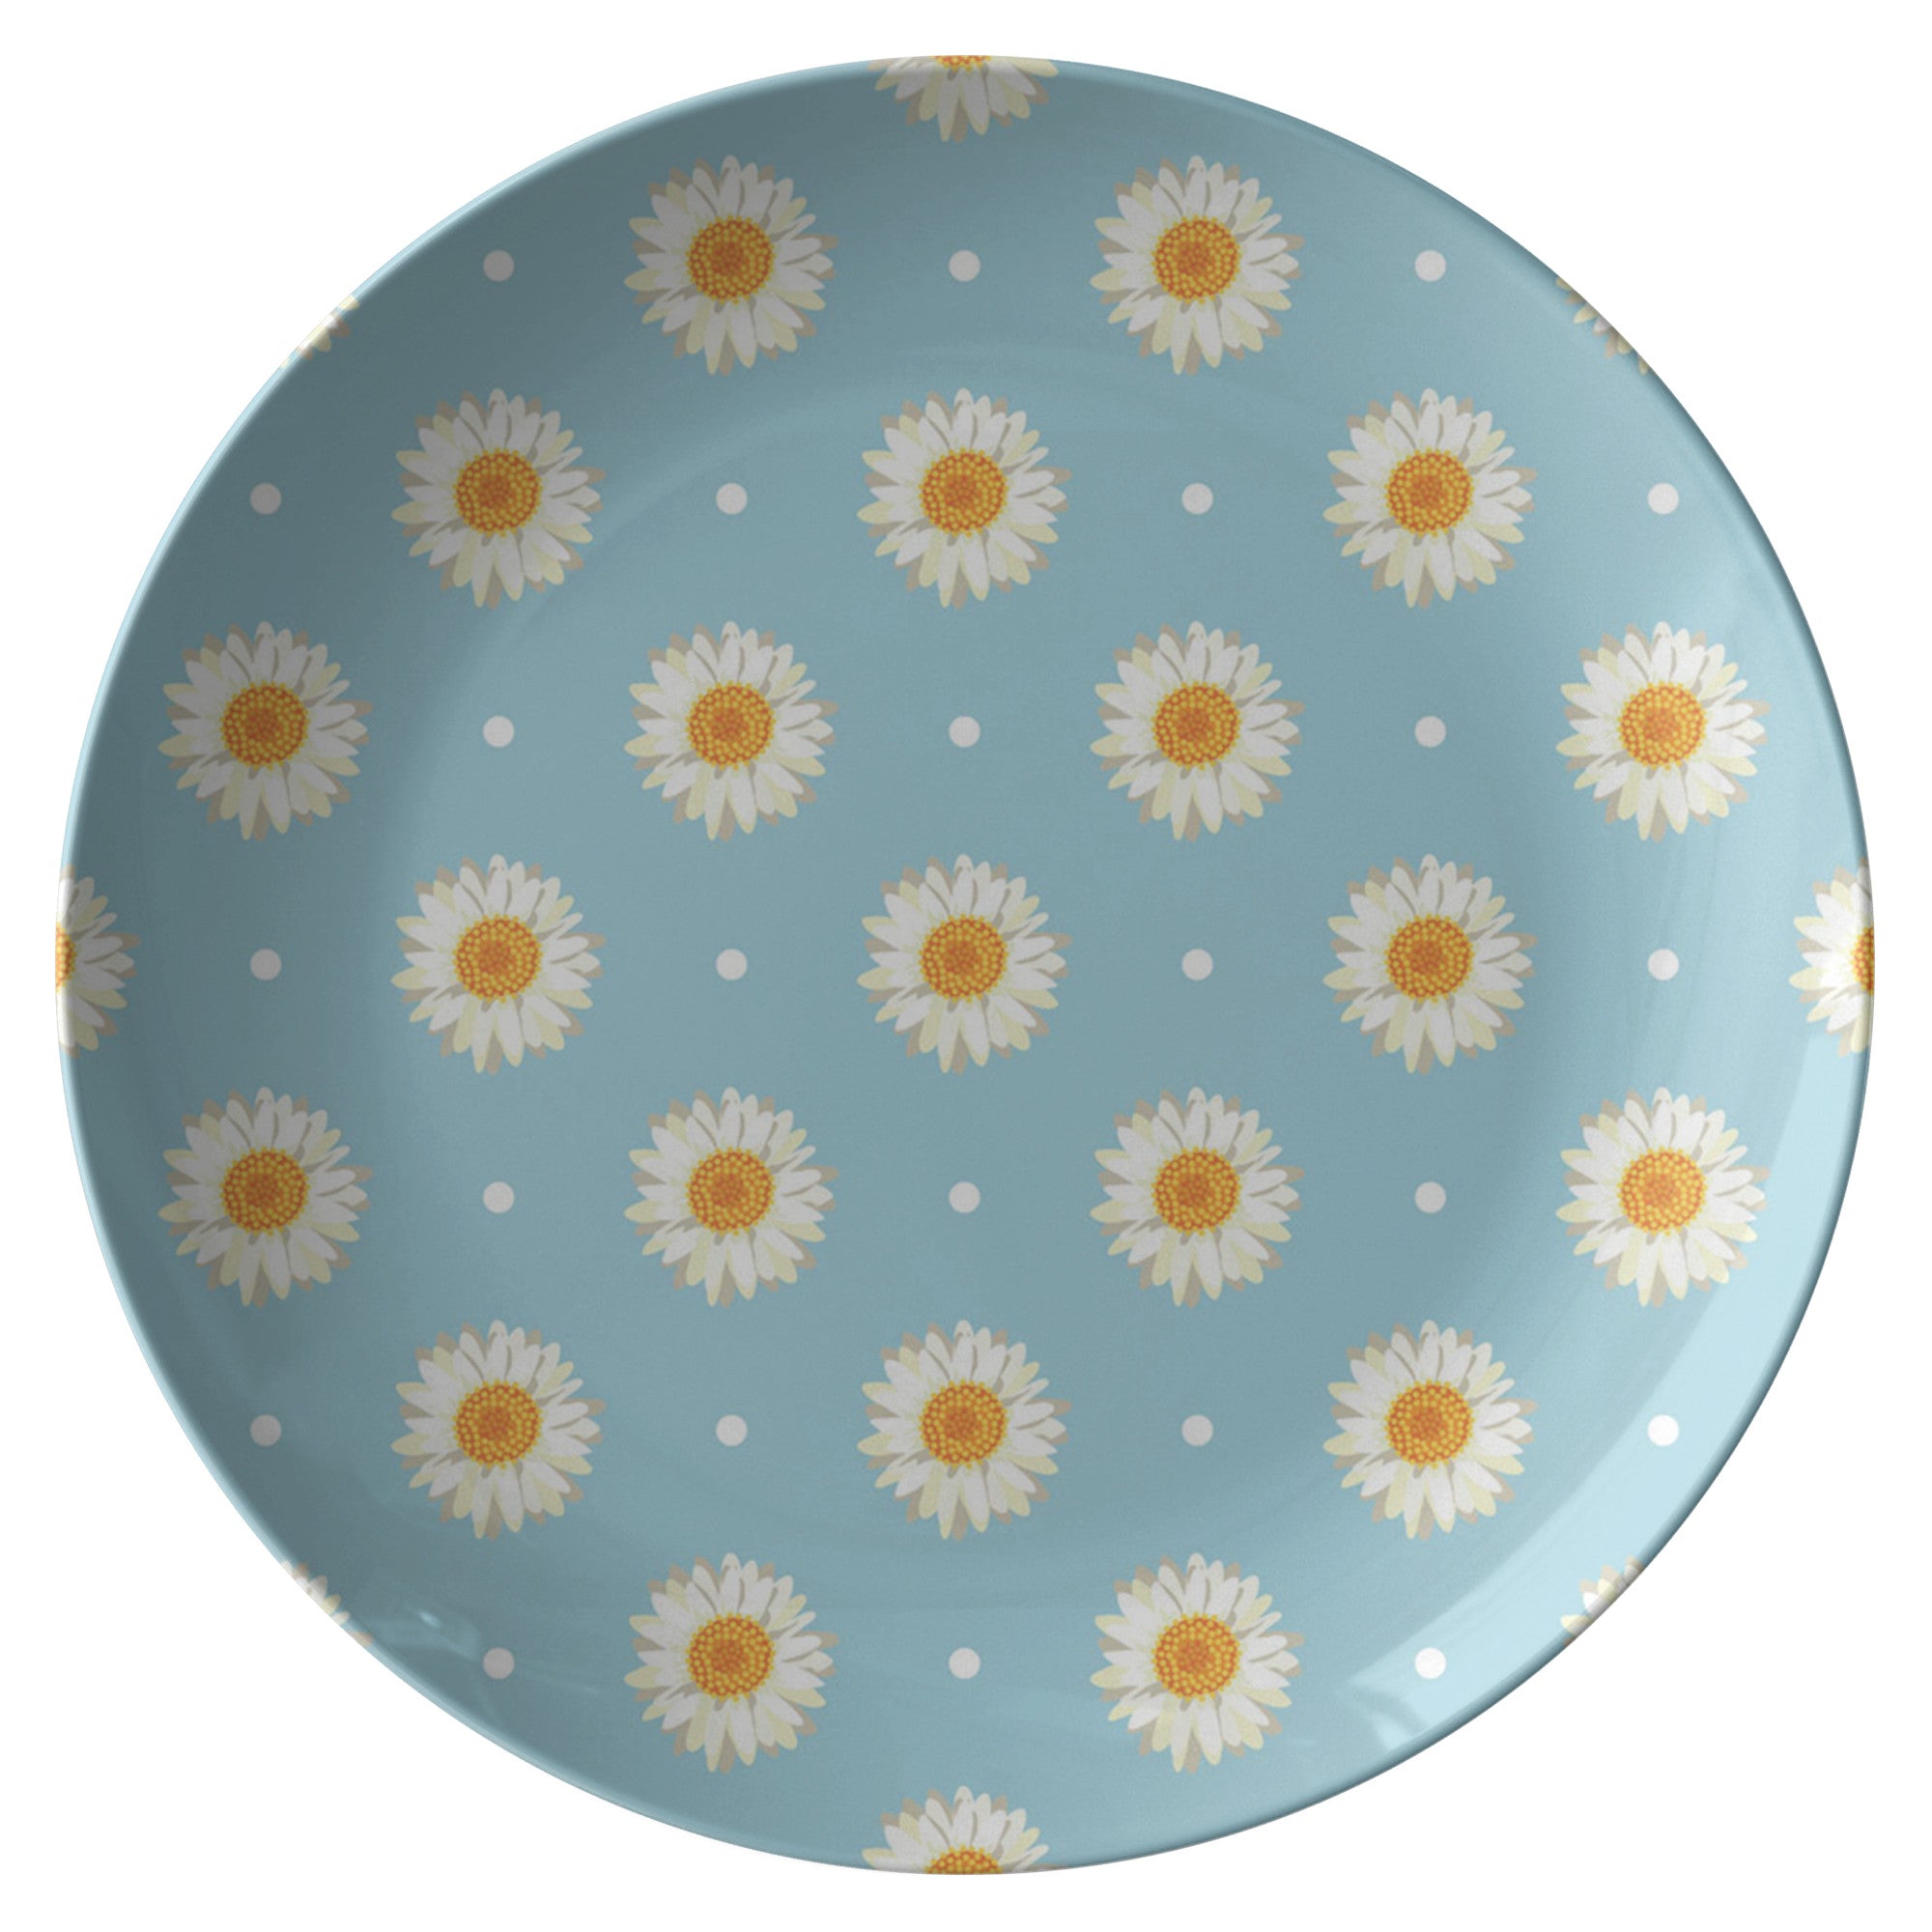 Printed Polymer Dinner Plate - Daisy Dots